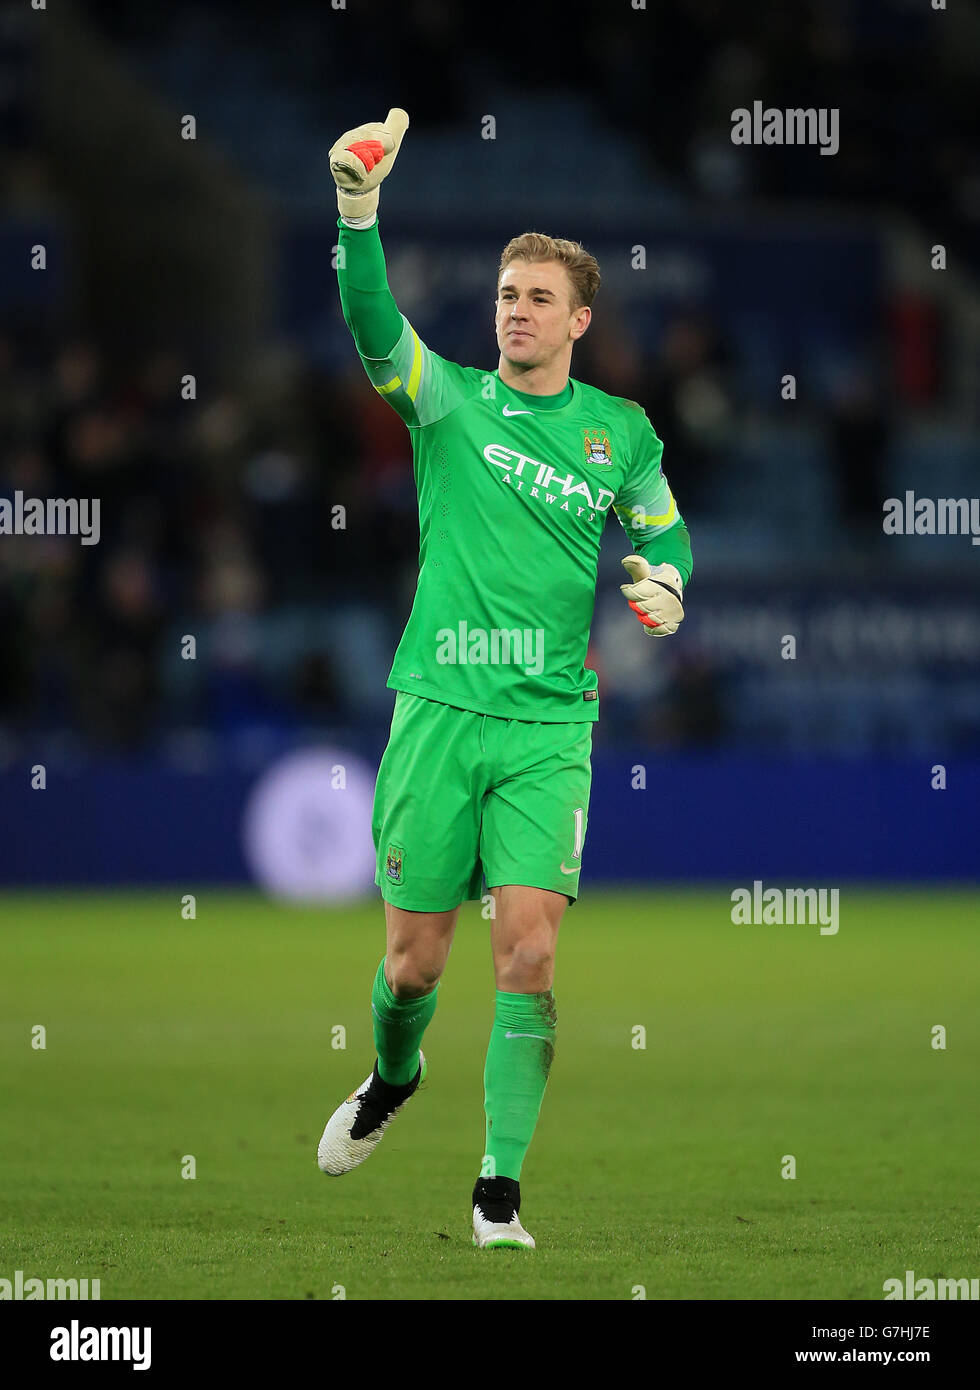 Manchester City goalkeeper Joe Hart celebrates after the game during the Barclays Premier League match at the King Power Stadium, Leicester. PRESS ASSOCIATION Photo. Picture date: Saturday December 13, 2014. See PA story SOCCER Leicester. Photo credit should read Nick Potts/PA Wire. Maximum 45 images during a match. No video emulation or promotion as 'live'. No use in games, competitions, merchandise, betting or single club/player services. No use with unofficial audio, video, data, fixtures or club/league logos. Stock Photo